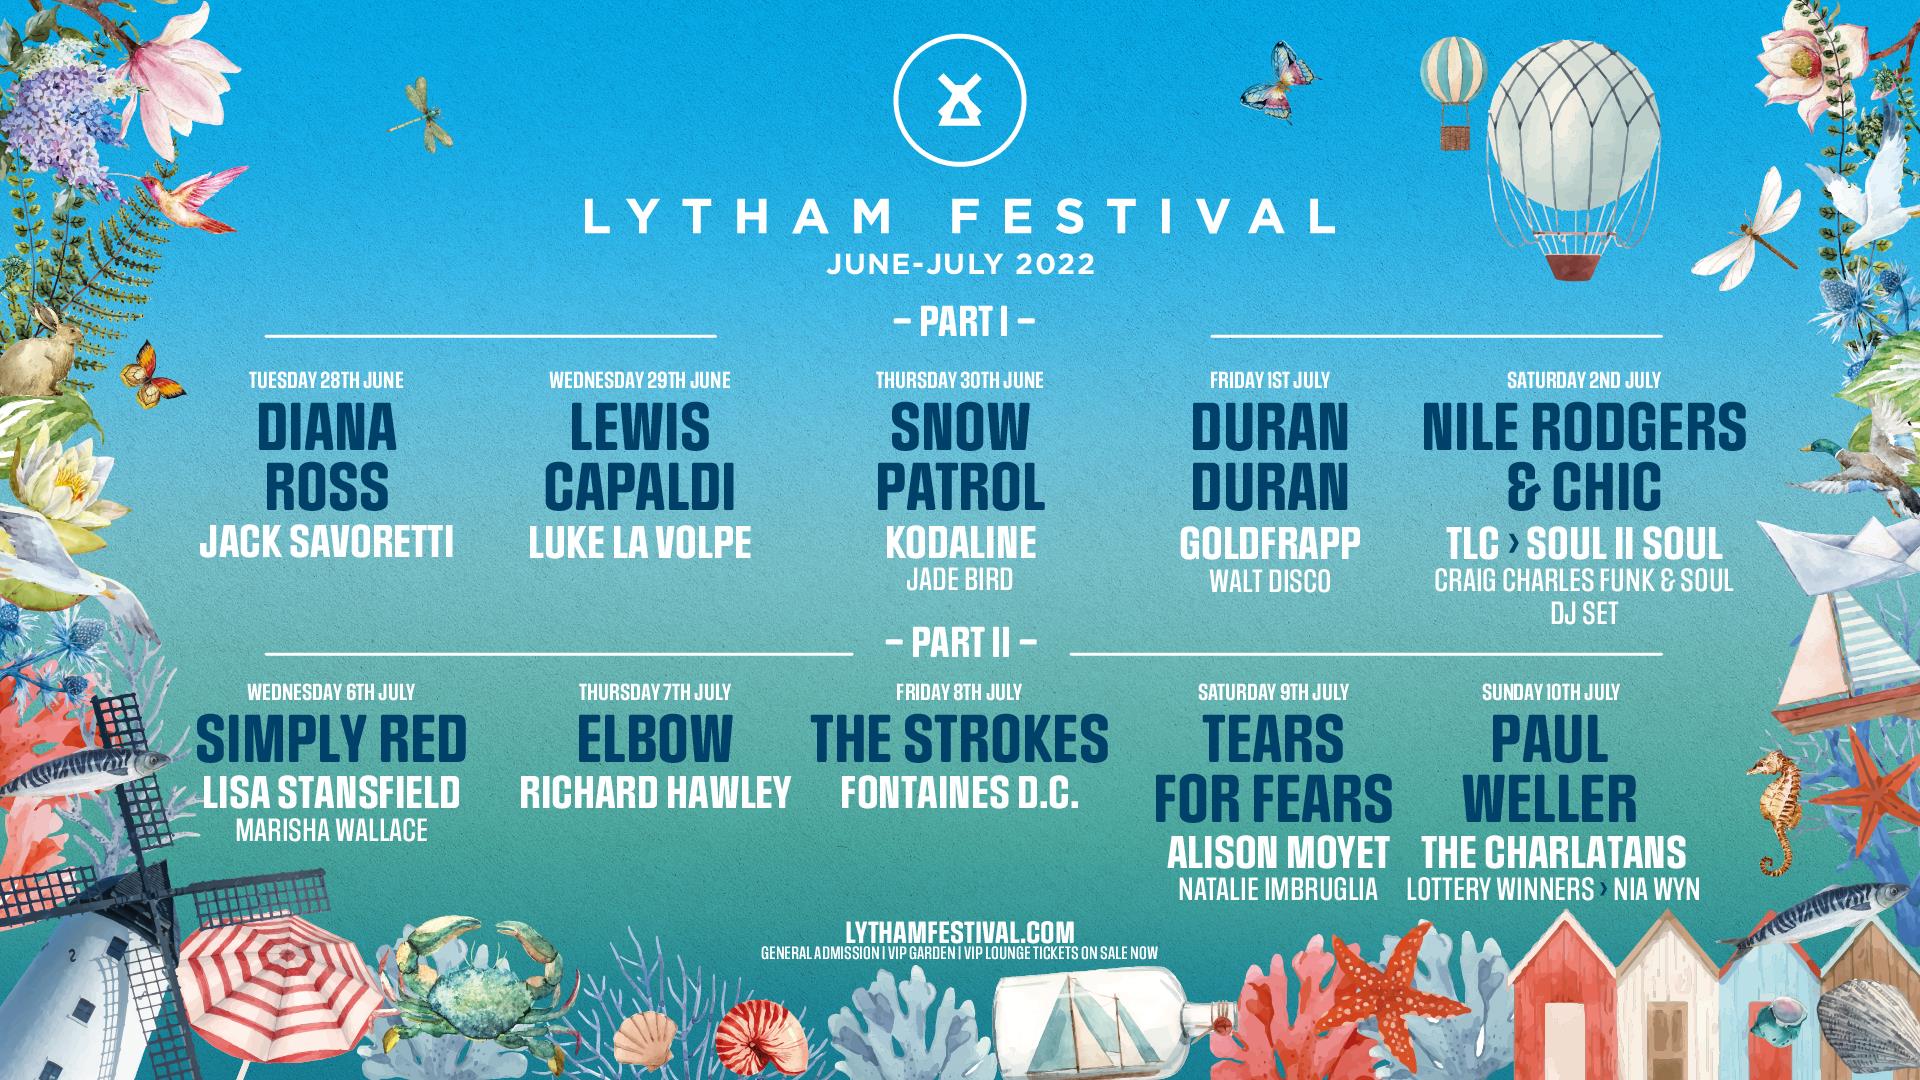 Lytham Festival 2022 – The Strokes - Lowther Pavilion